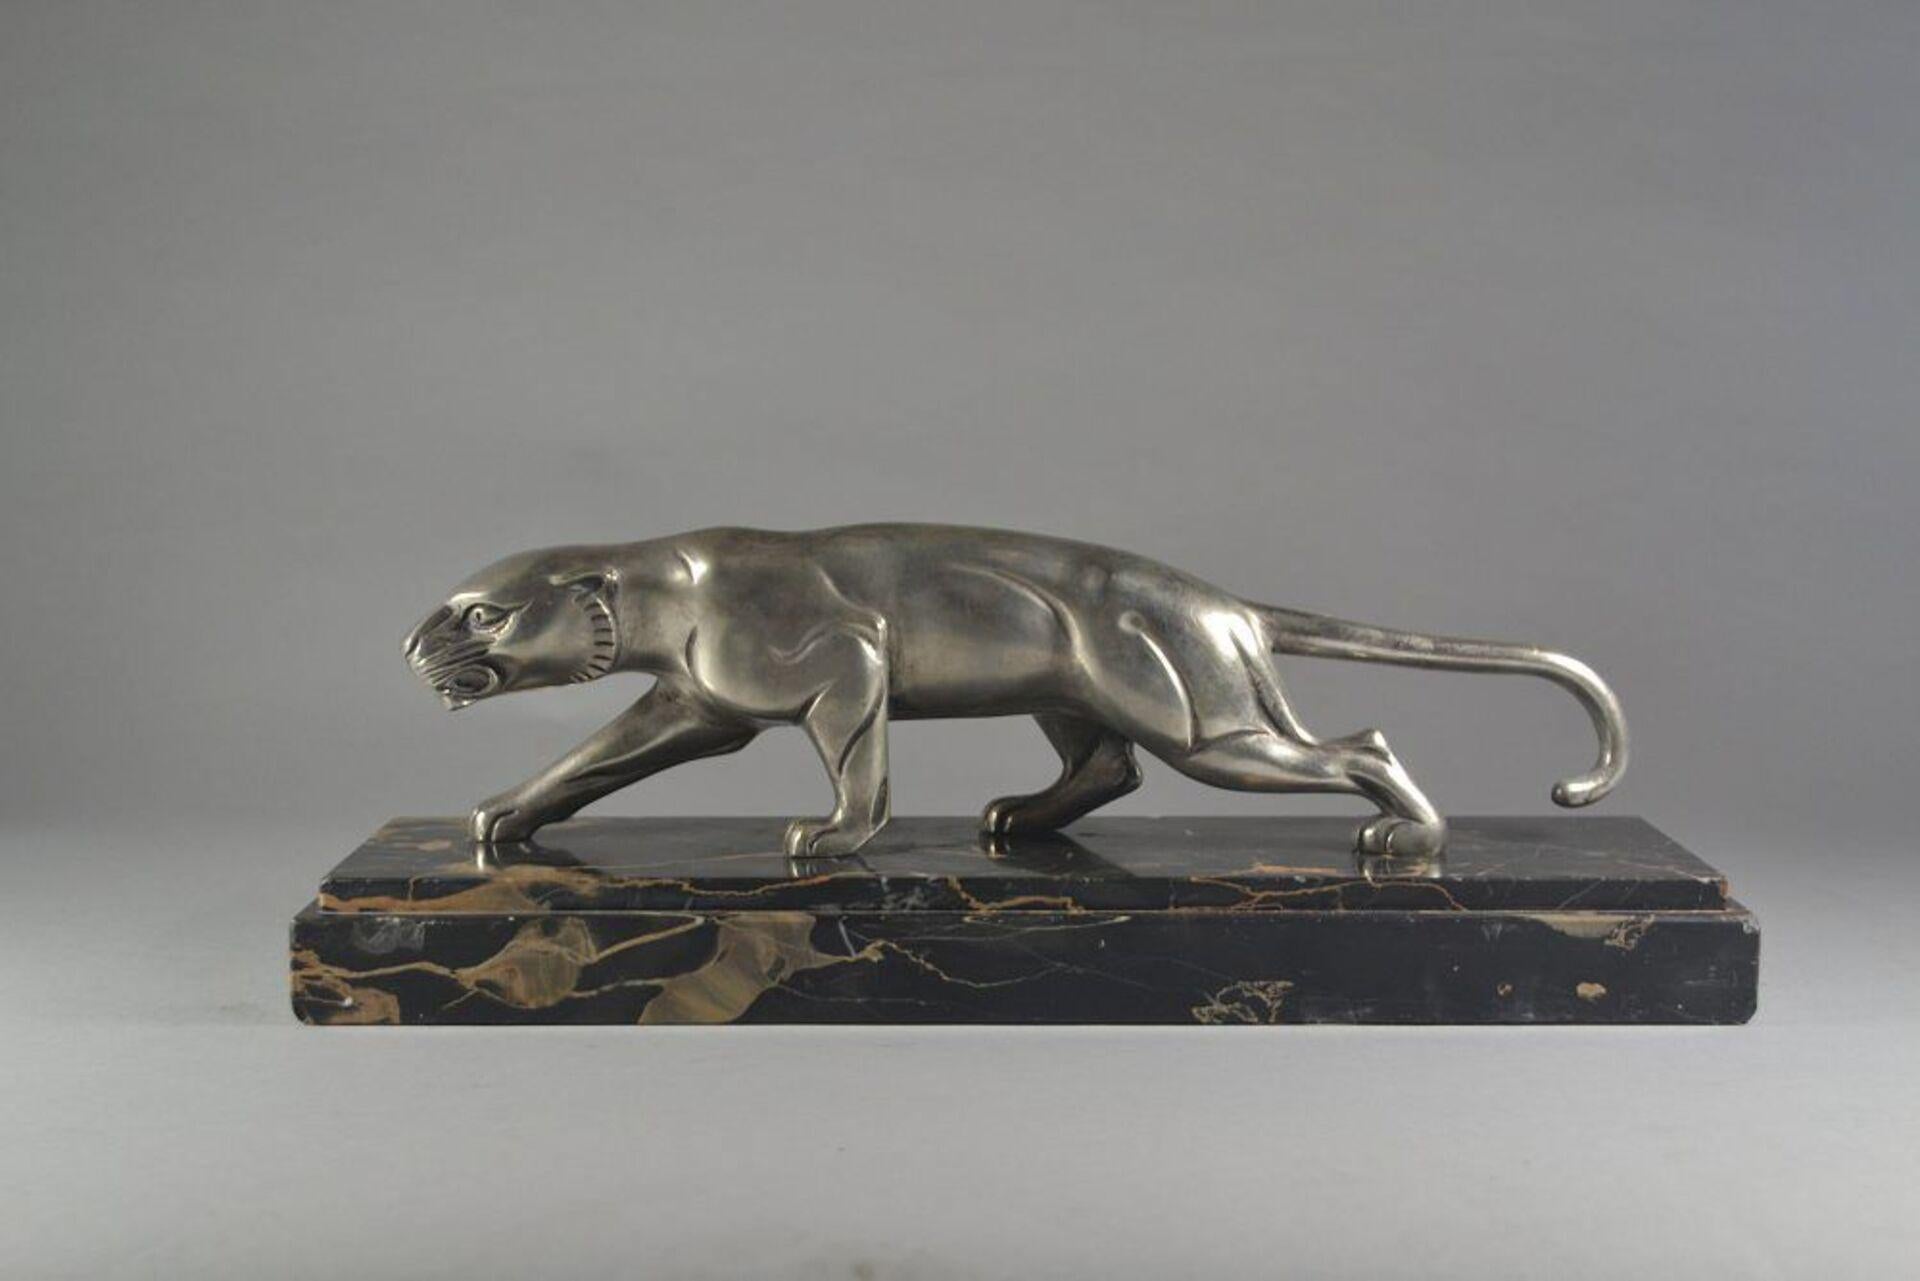 Signed art deco silver plated bronze stylized panther on portoro marble base.
Signed and stamped in the bronze right leg.
Excellent condition.
French. Circa 1930.